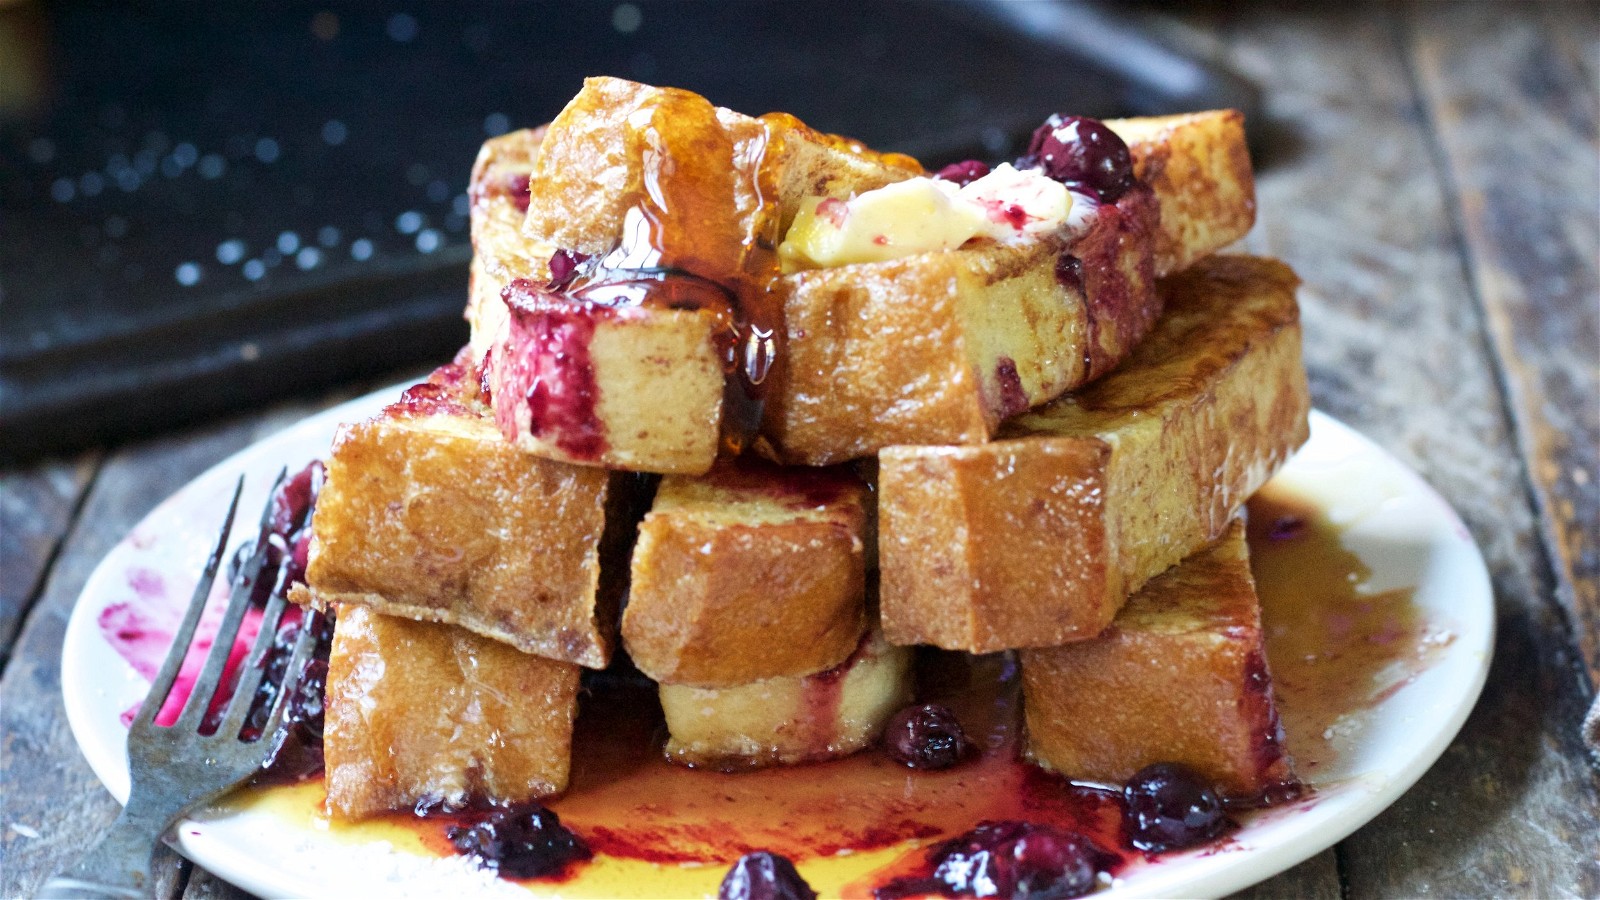 Image of Cinnamon French Toast Sticks with a Blast of Blueberry